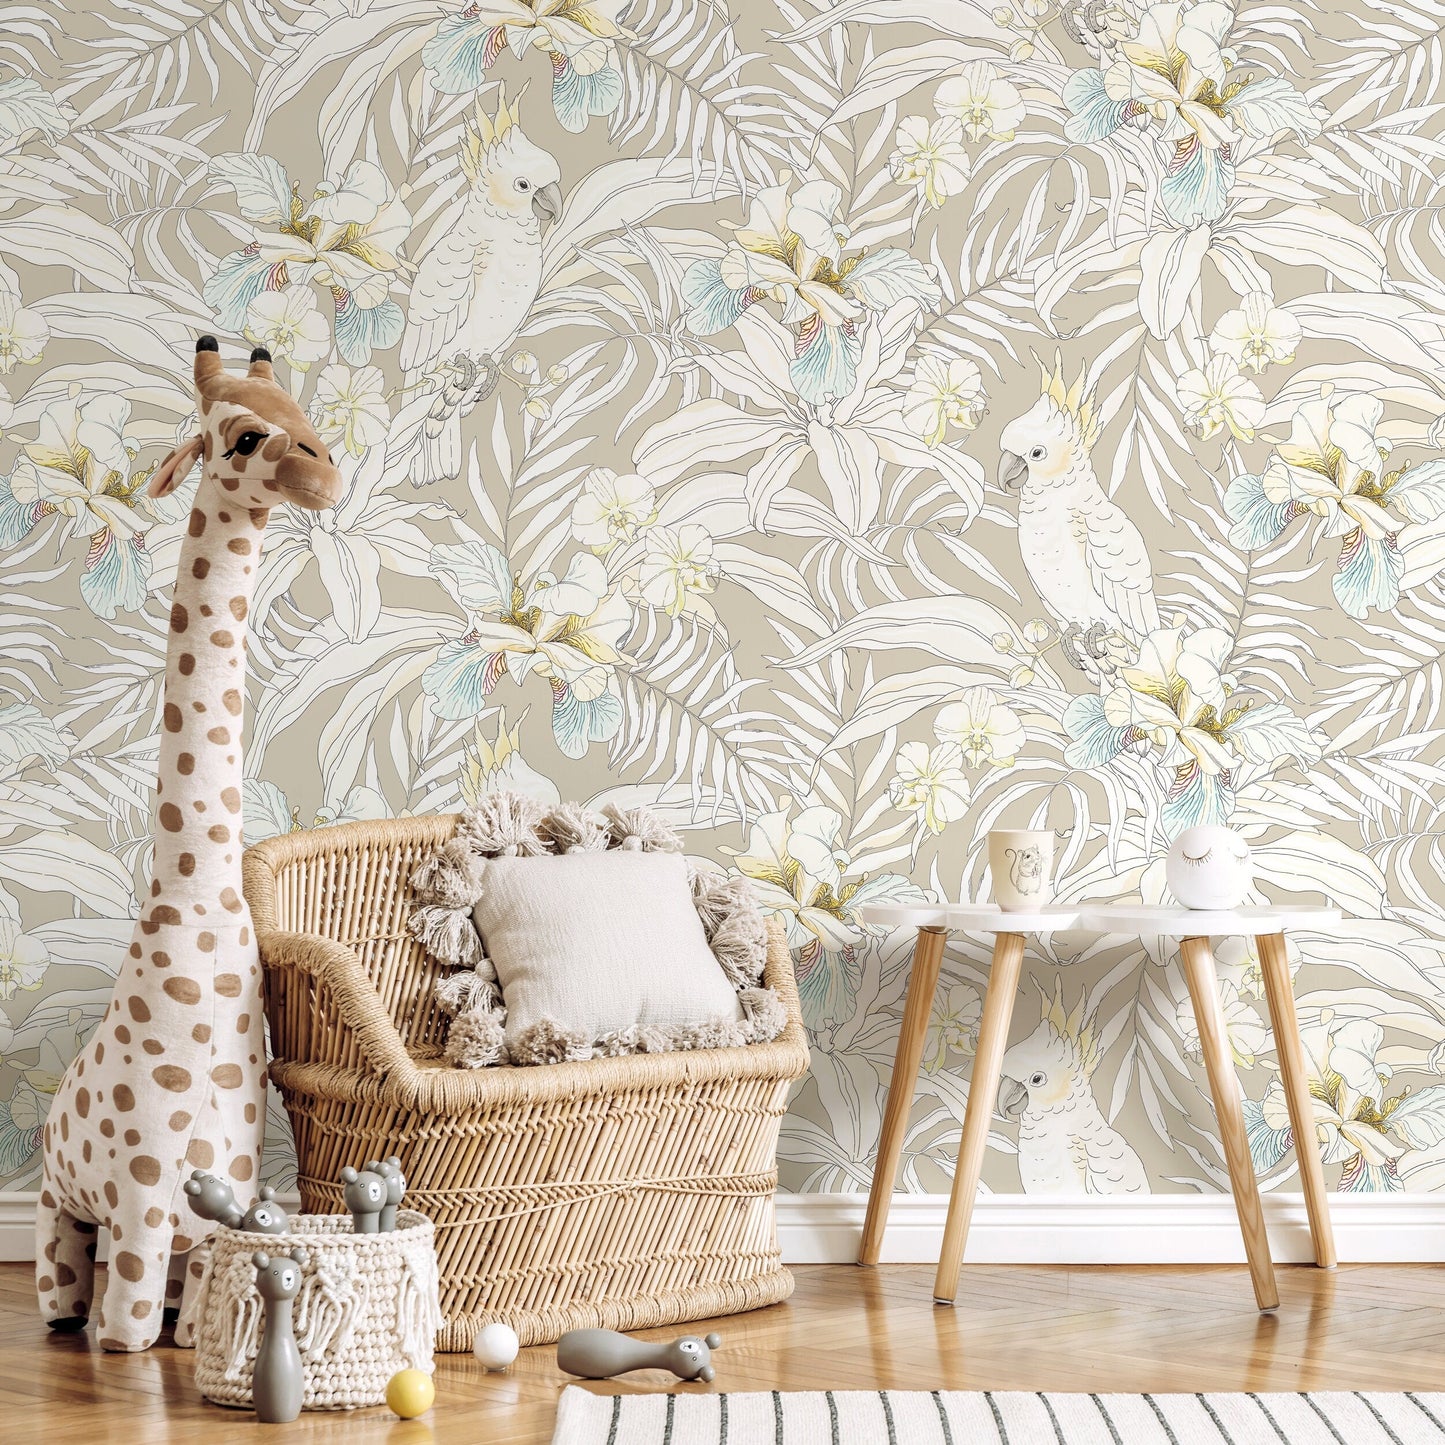 Wallpaper Peel and Stick Wallpaper Removable Wallpaper Home Decor Wall Art Wall Decor Room Decor / Neutral Tropical Animal Wallpaper - C331